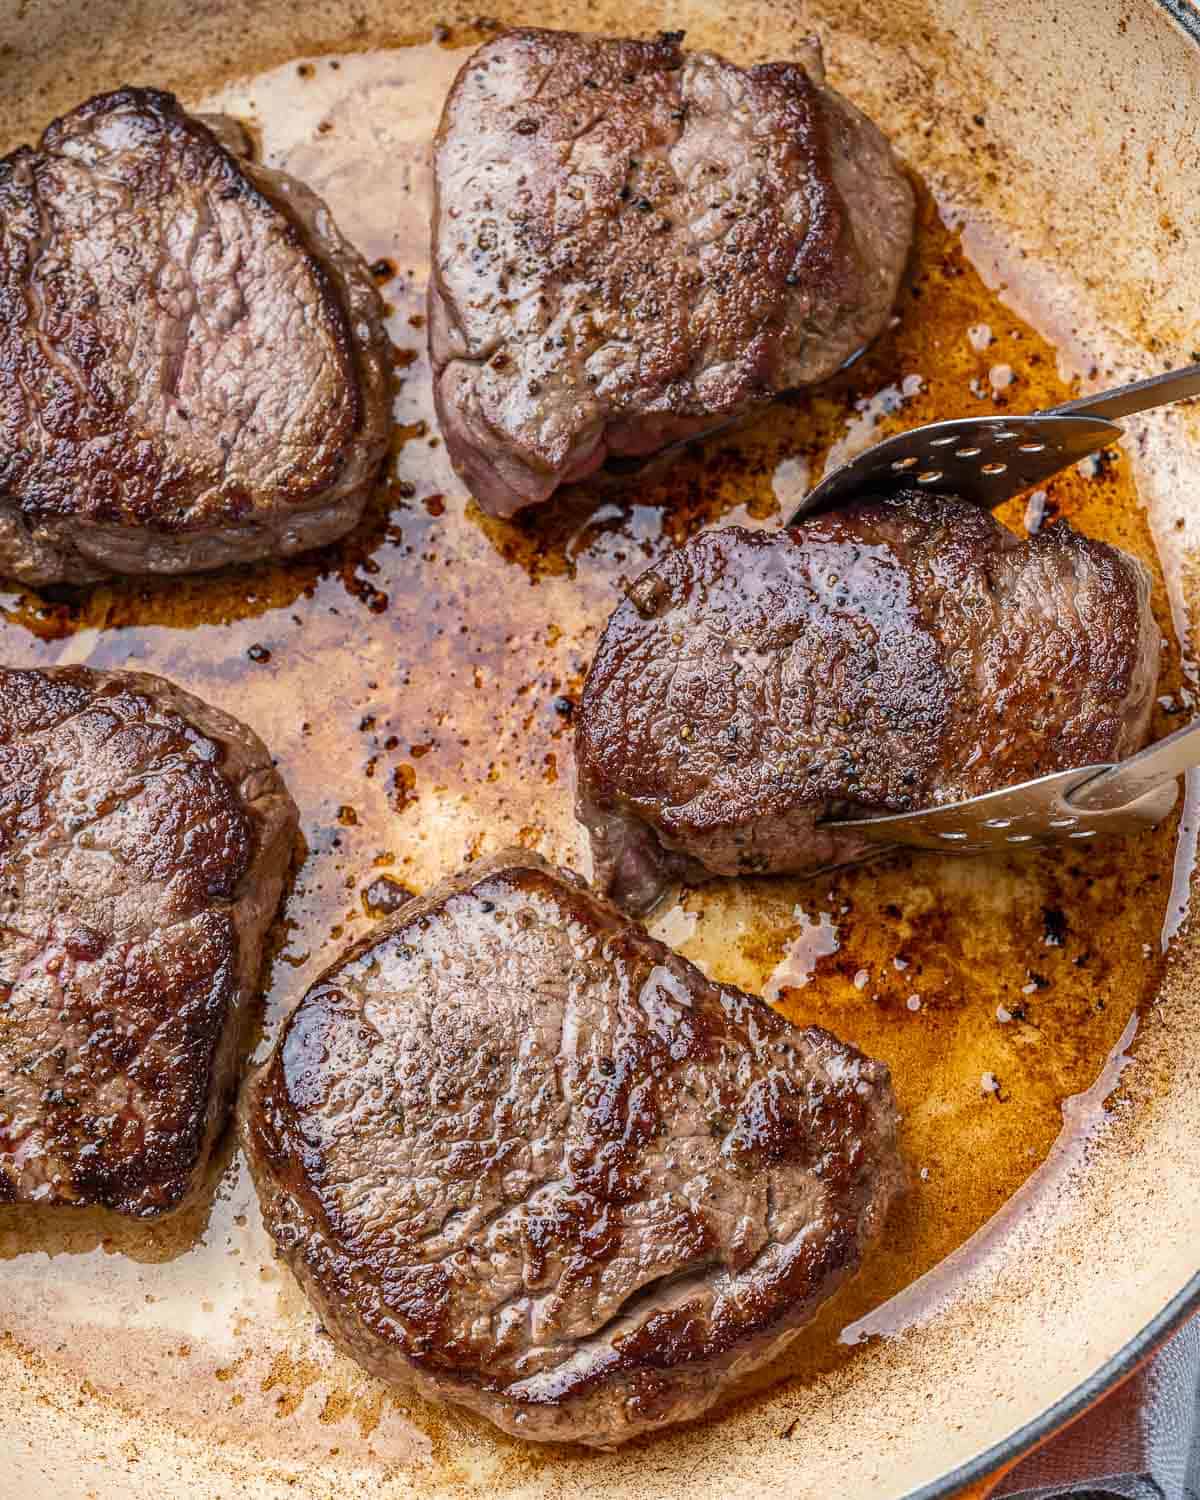 Tongs removing seared steak from pan.